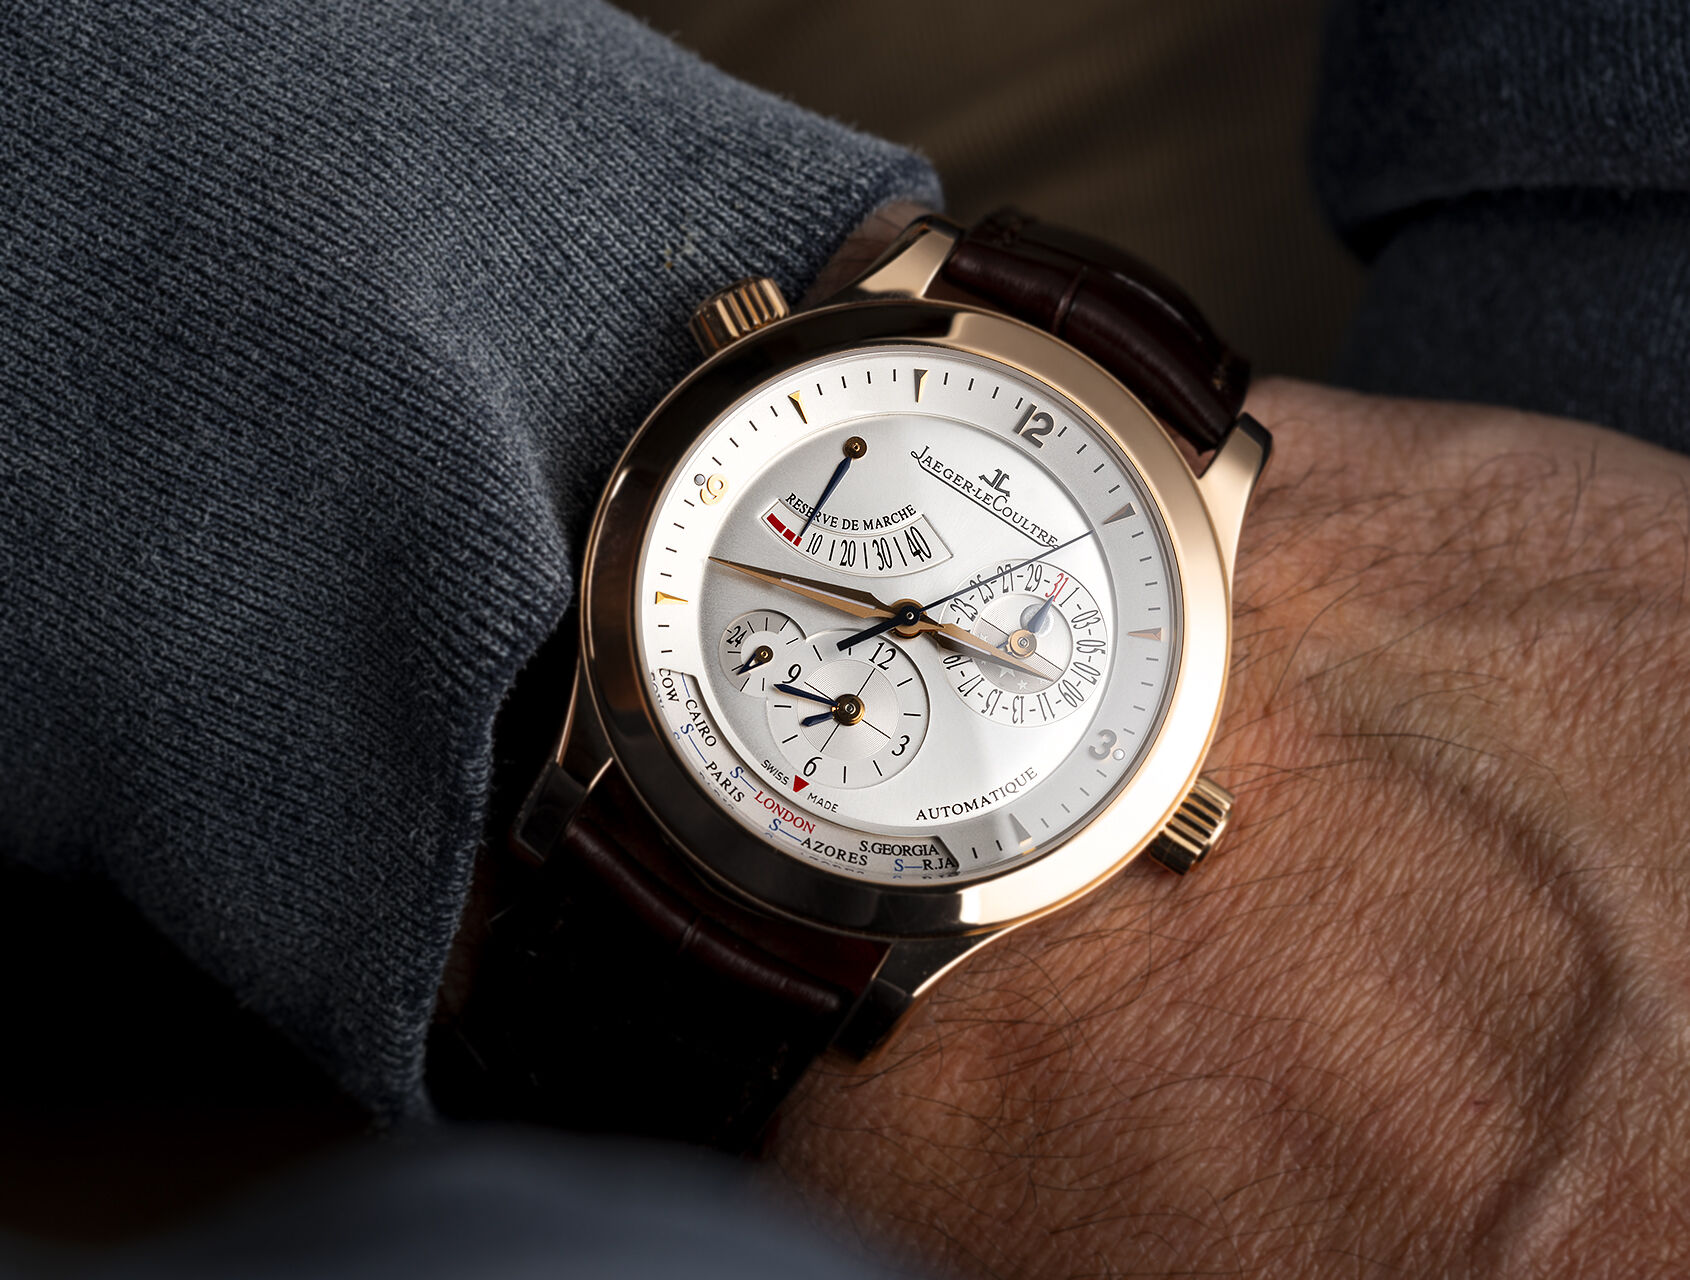  | Master Geographic | Jaeger-leCoultre Master Geographic